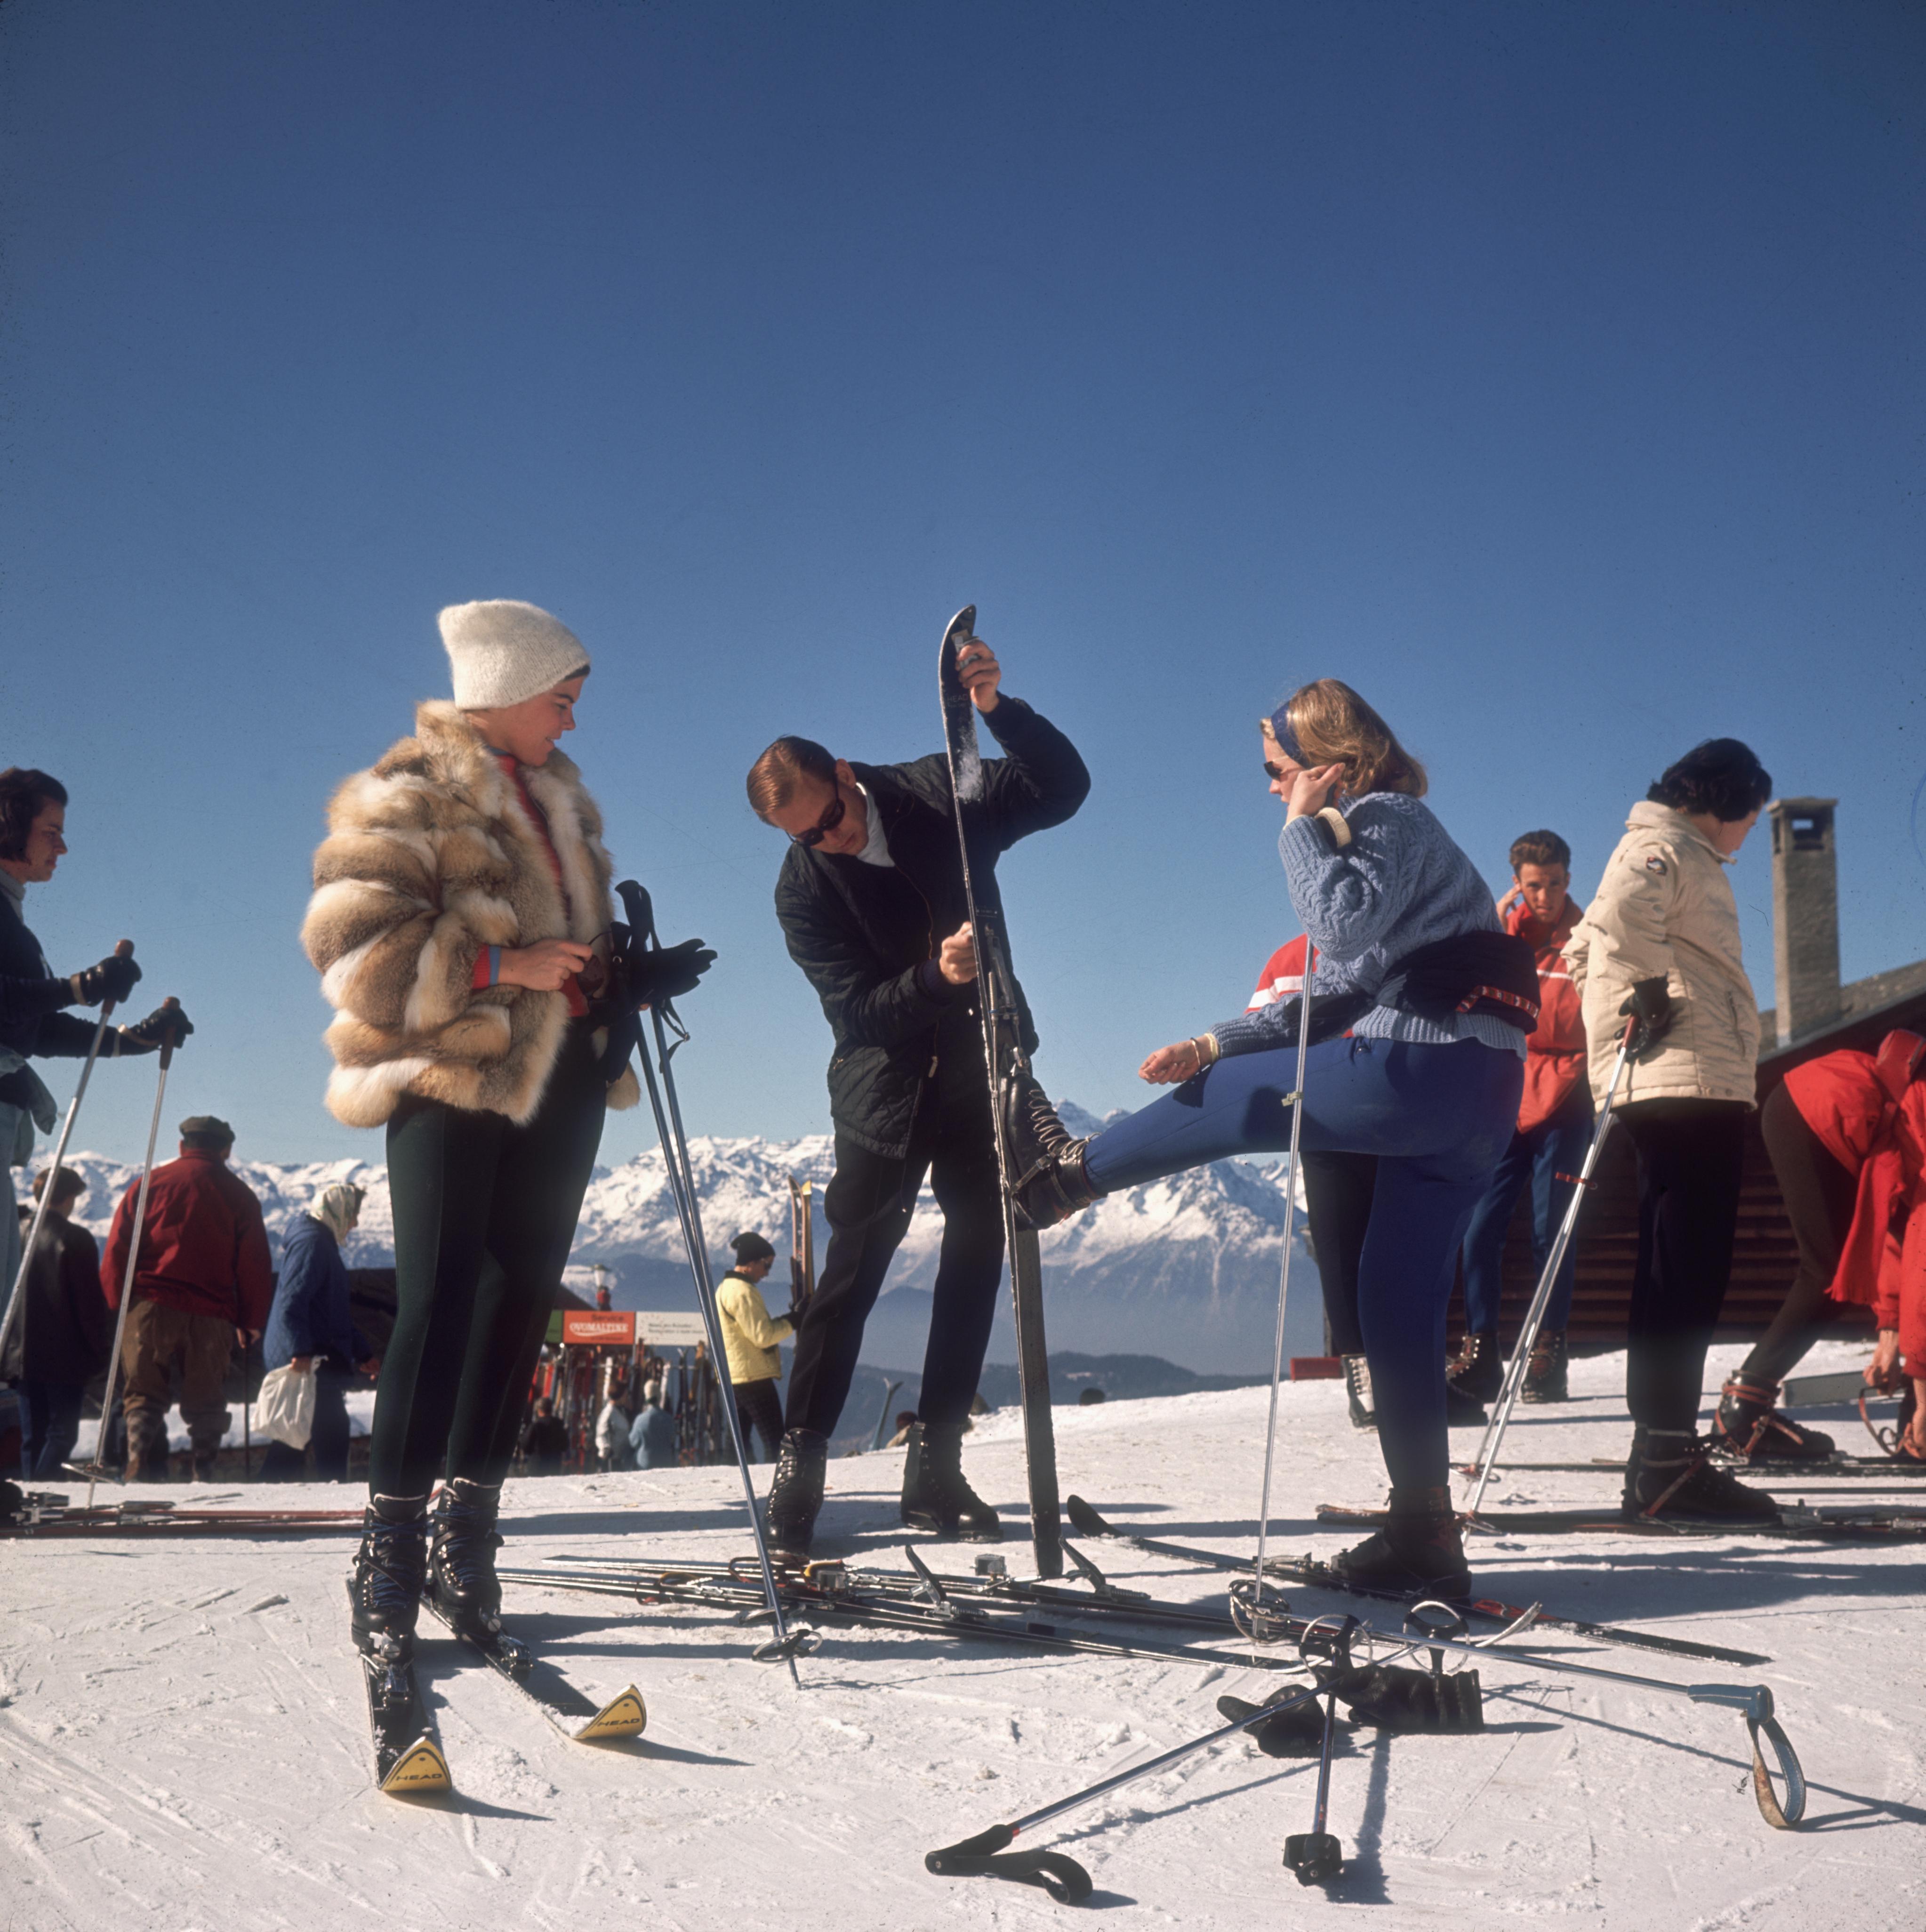 'Verbier Skiers' 1964 Slim Aarons Limited Estate Edition

Fashionable Skiers at Verbier, 1964. 

Produced from the original transparency
Certificate of authenticity supplied 
THIS PRINT 30x30 inches / 76 x 76 cm paper size 
Printed 2021

Authorised